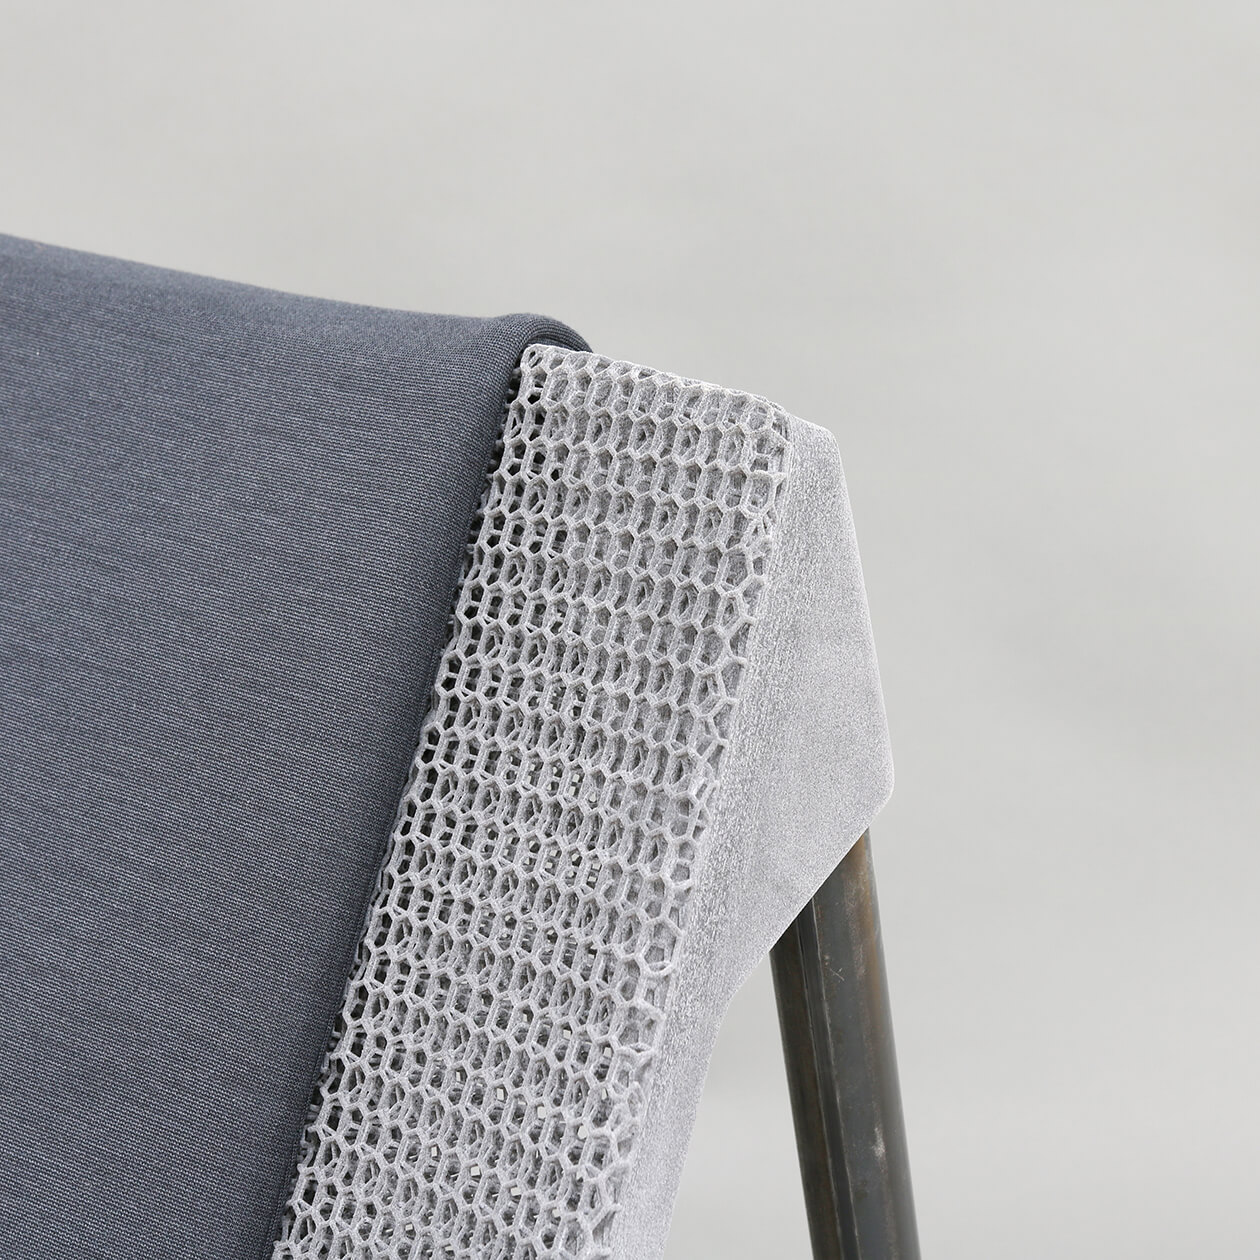 Close-up of a lounge chair with a lattice-structured backrest and a dark gray seat cushionray upholstery.